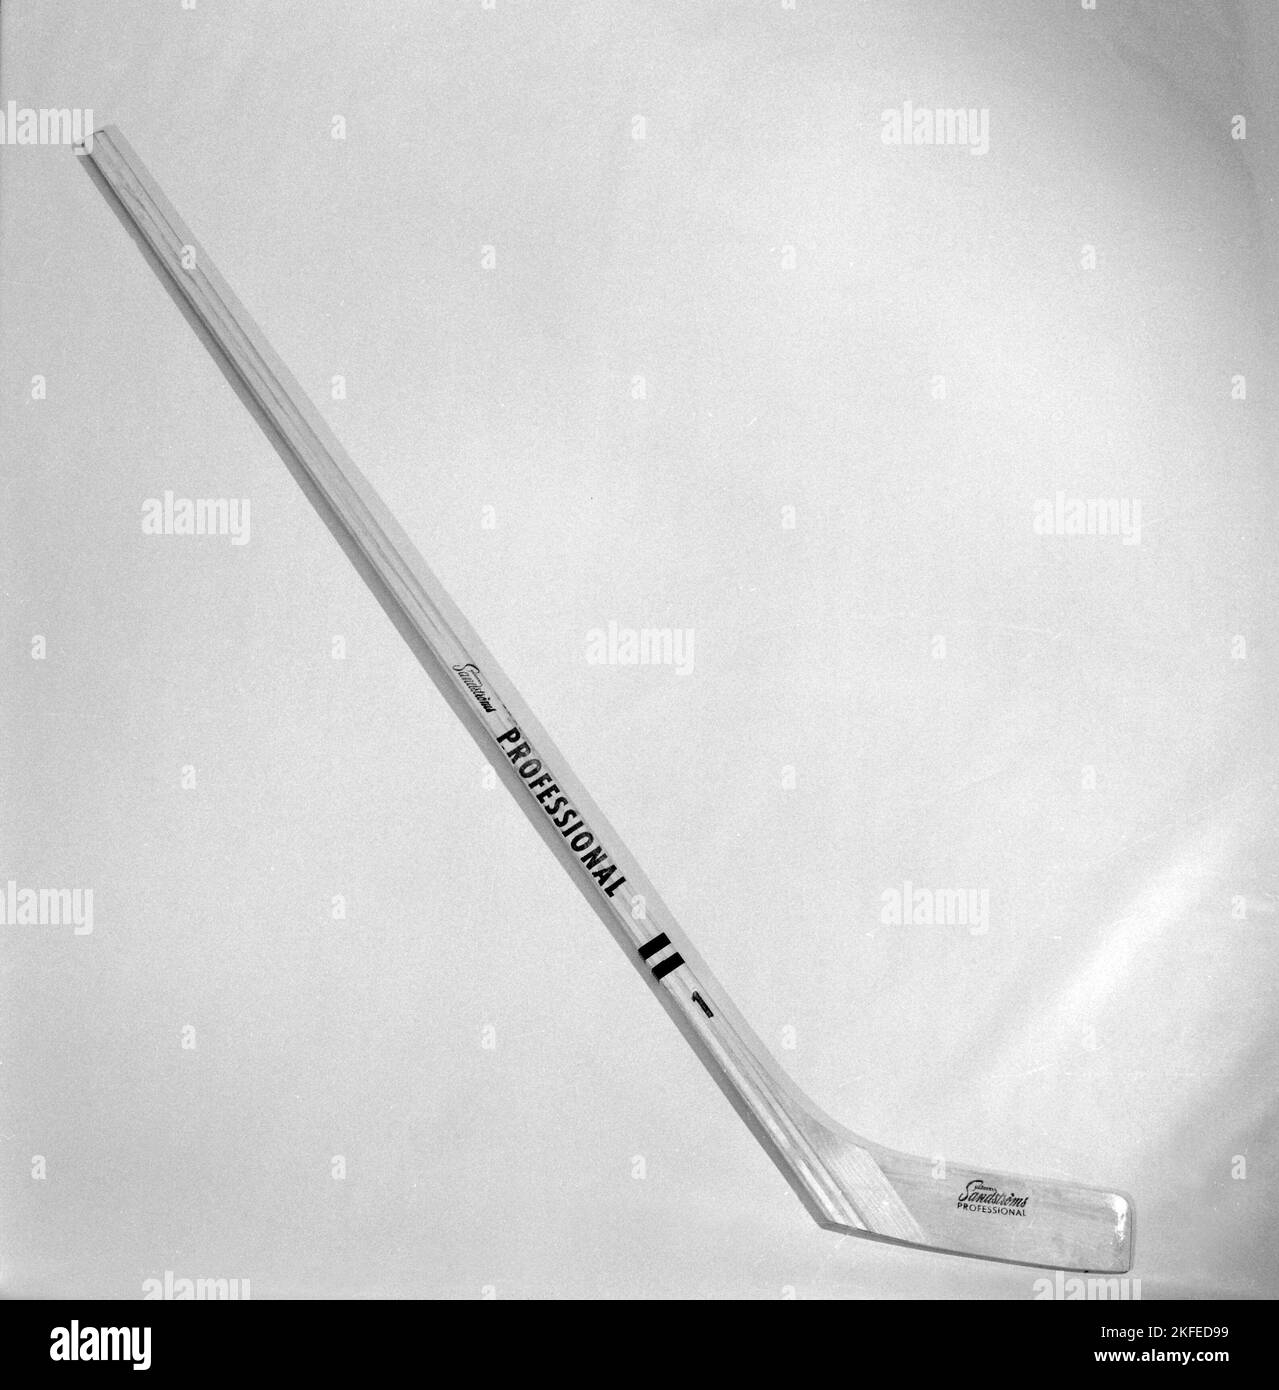 Cam Neely Boston Bruins White Canadien Game Used Stick